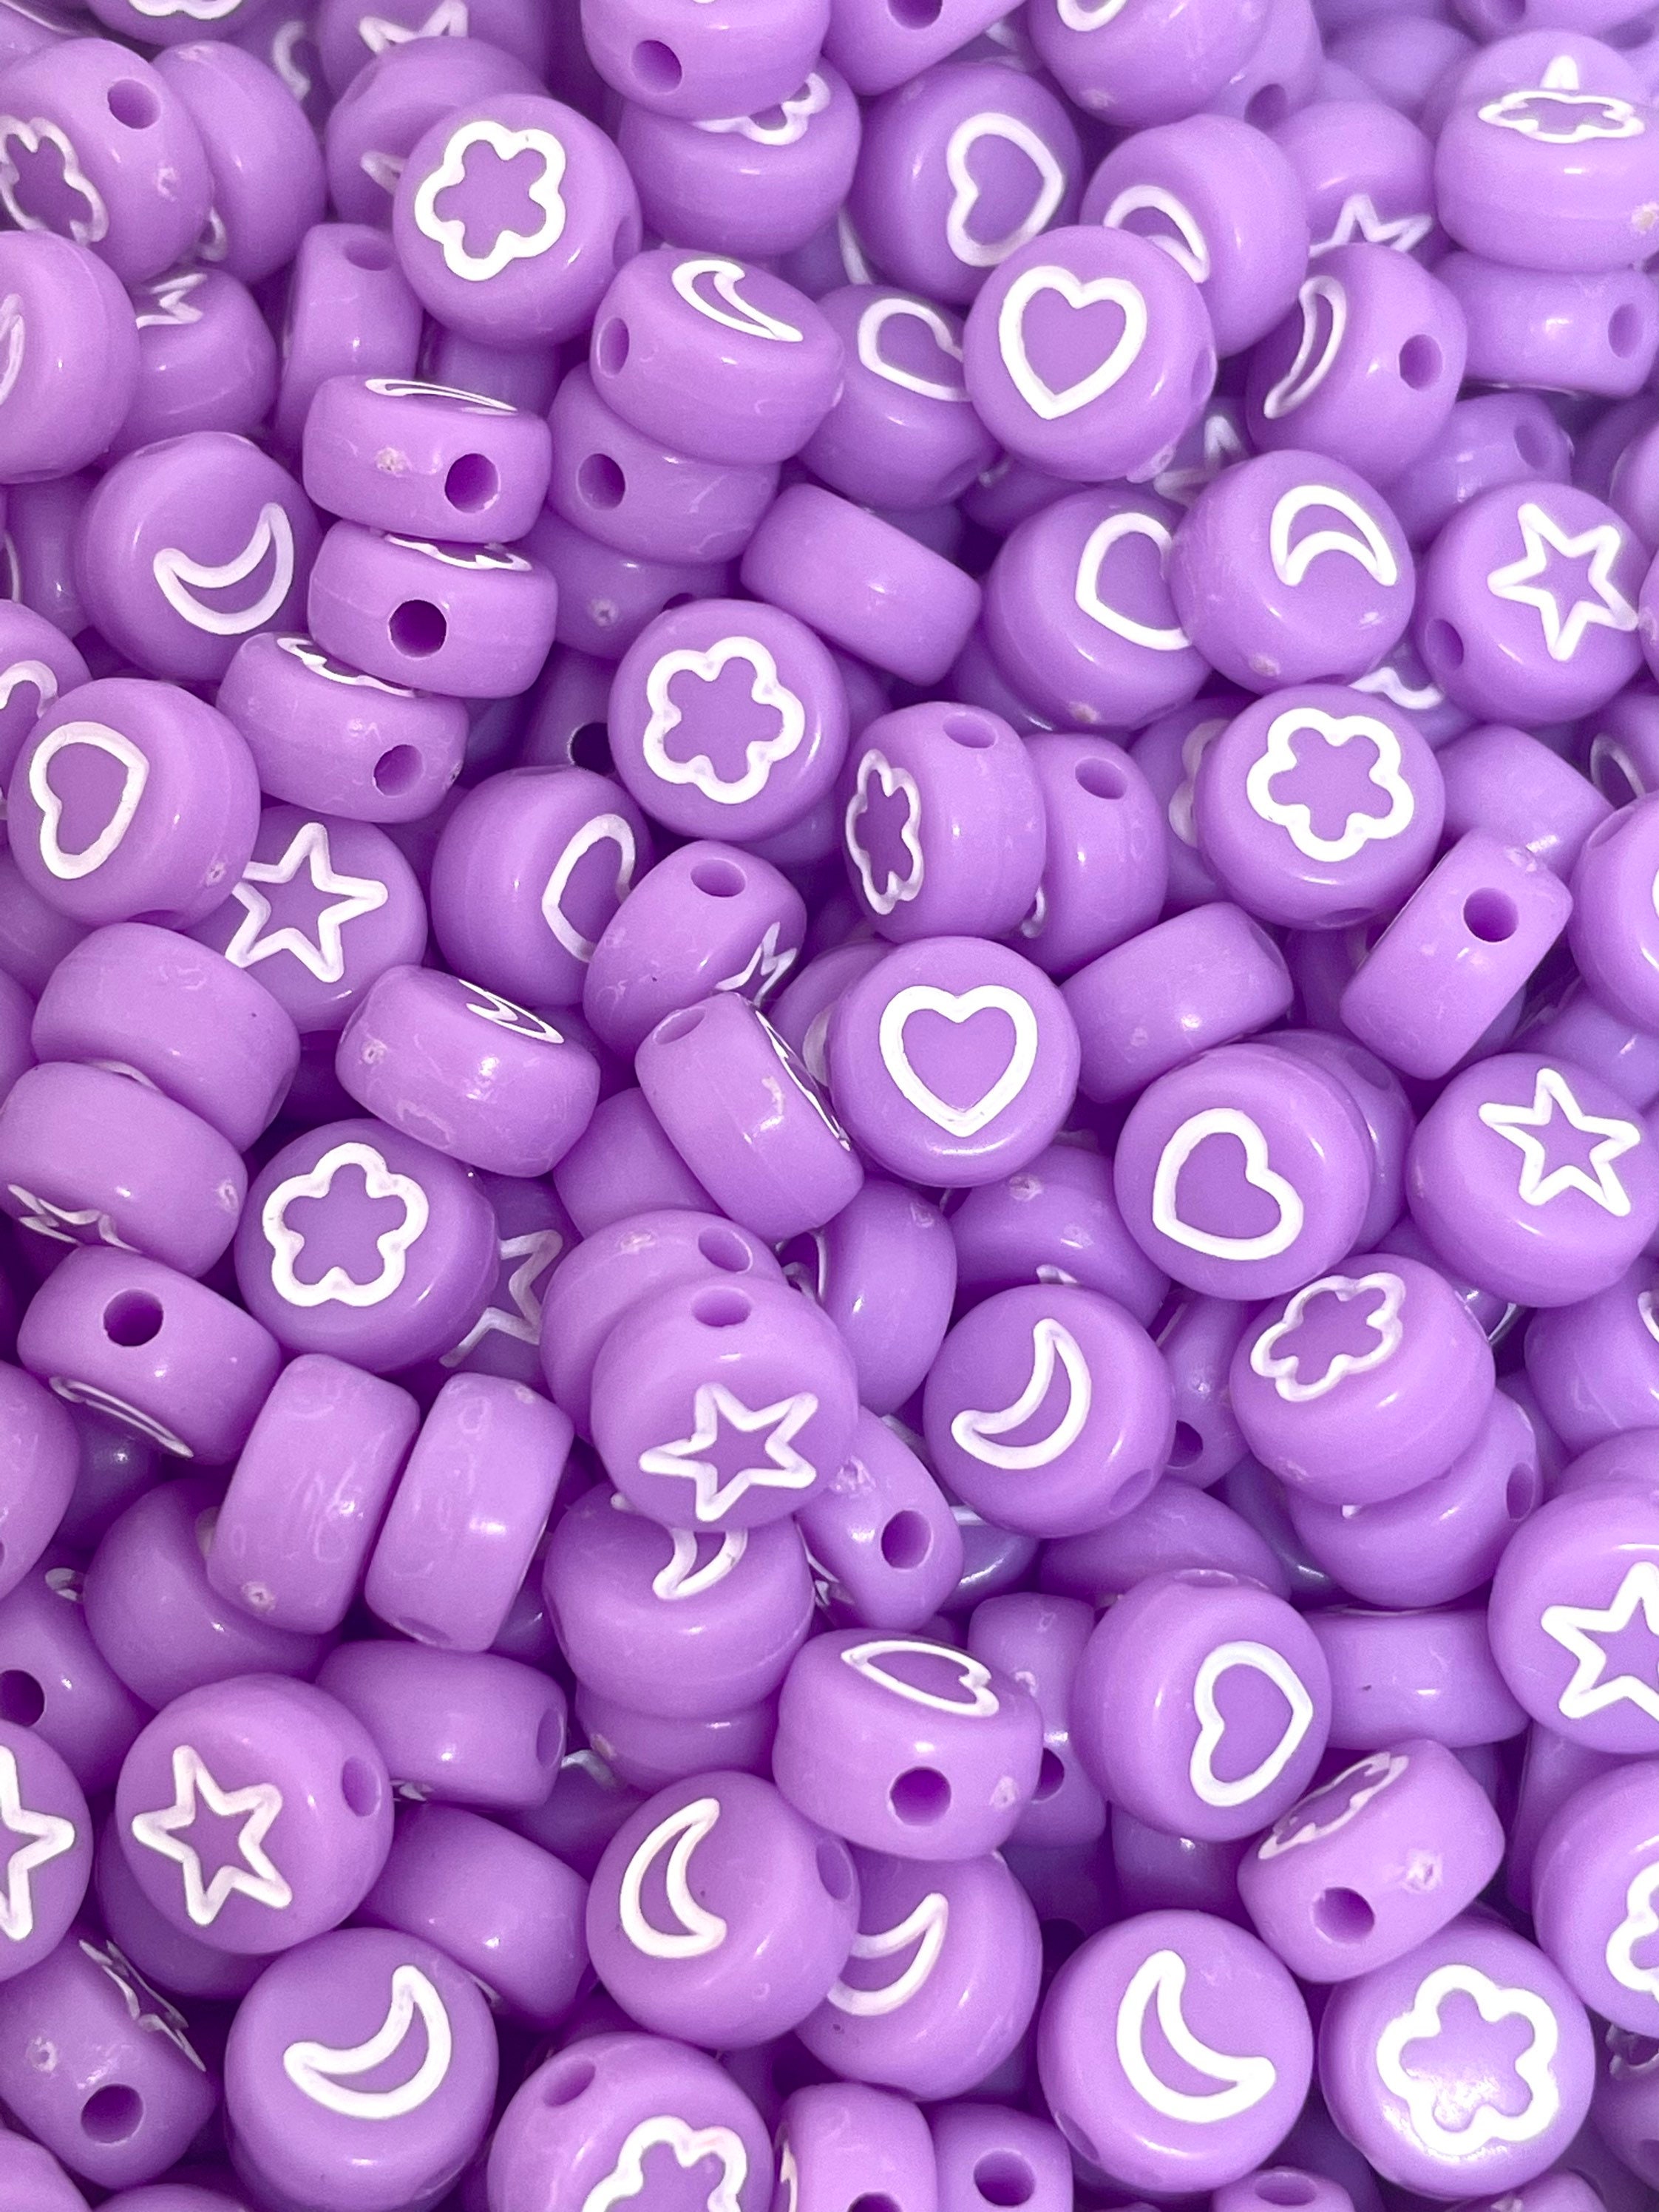 Heart Plastic Pony Beads, 13mm, Hot Pink Opaque, 125 beads